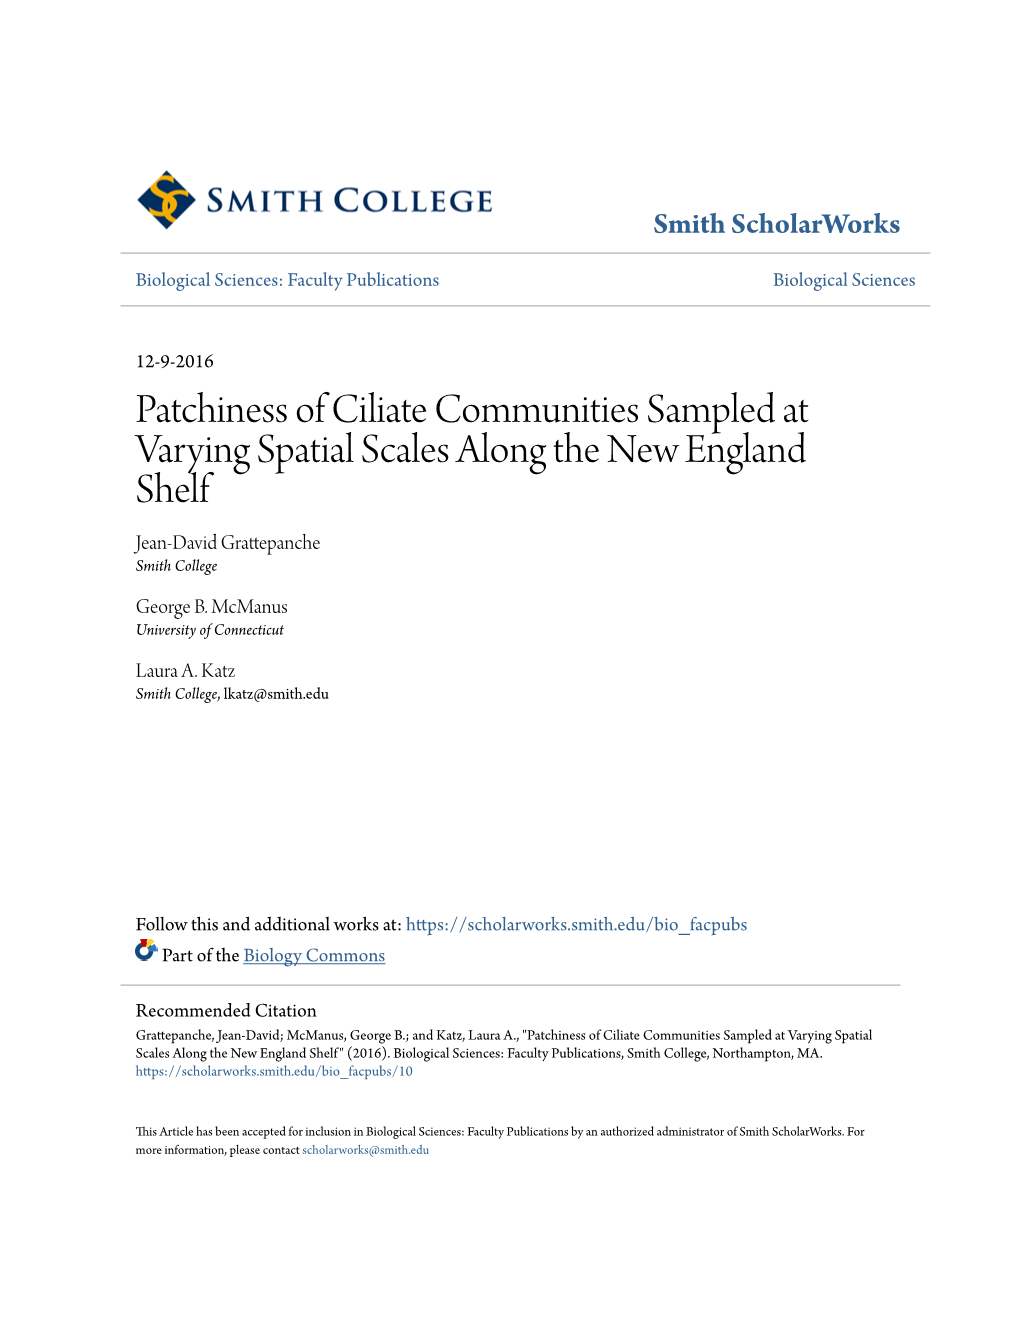 Patchiness of Ciliate Communities Sampled at Varying Spatial Scales Along the New England Shelf Jean-David Grattepanche Smith College